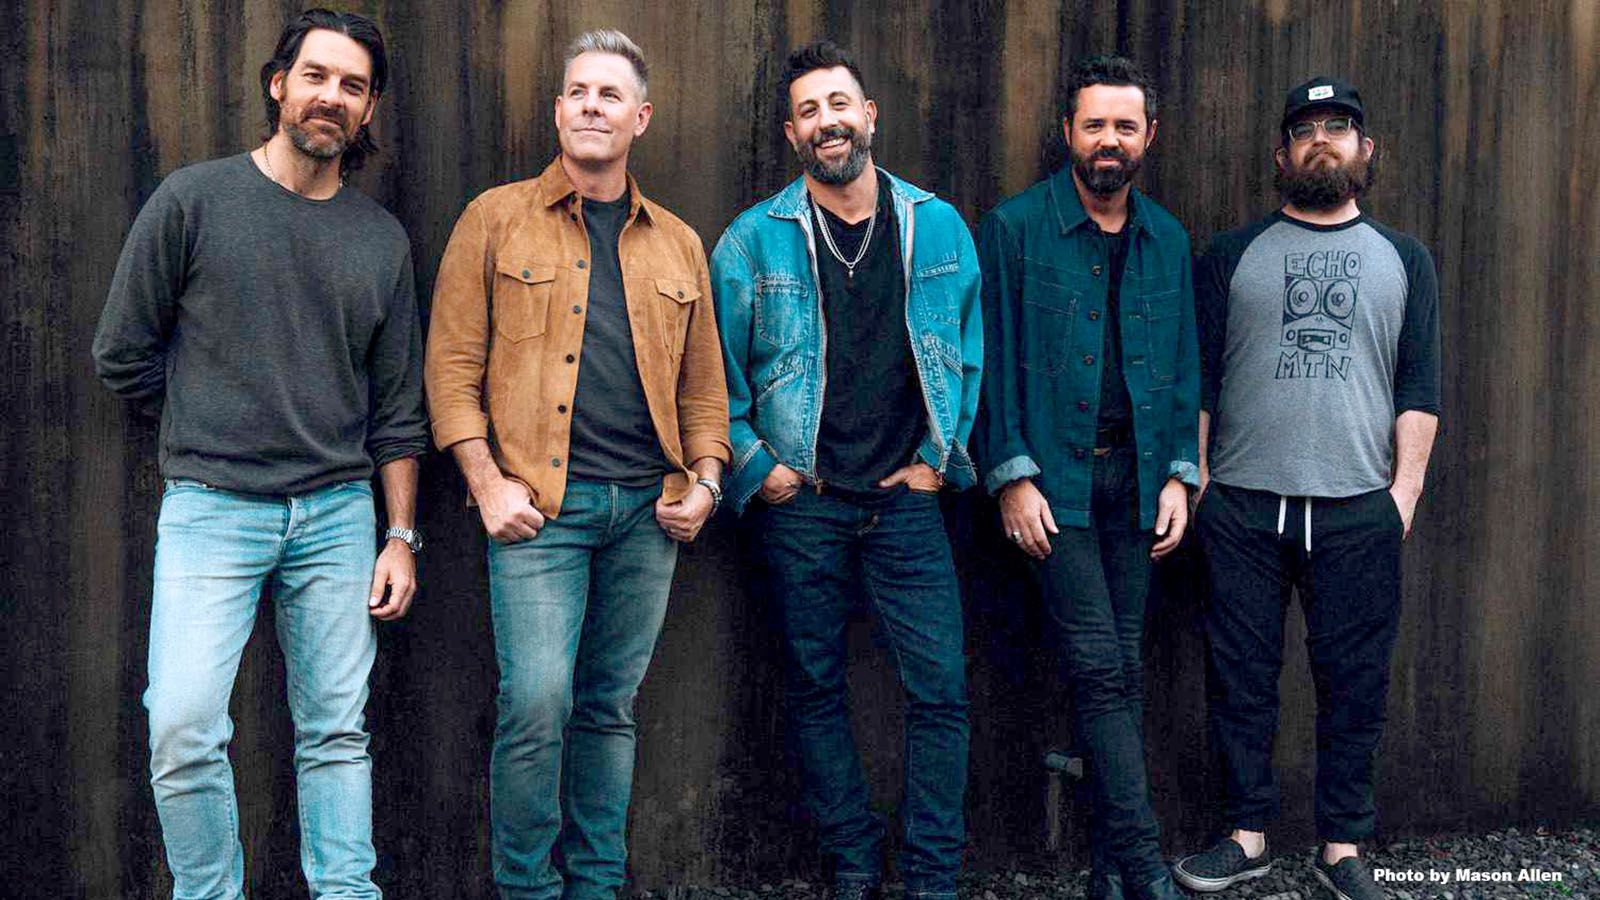 Old Dominion will make a stop at Memorial Coliseum on Thursday, Nov. 16, along with supporting acts Chase Rice and Kylie Morgan.